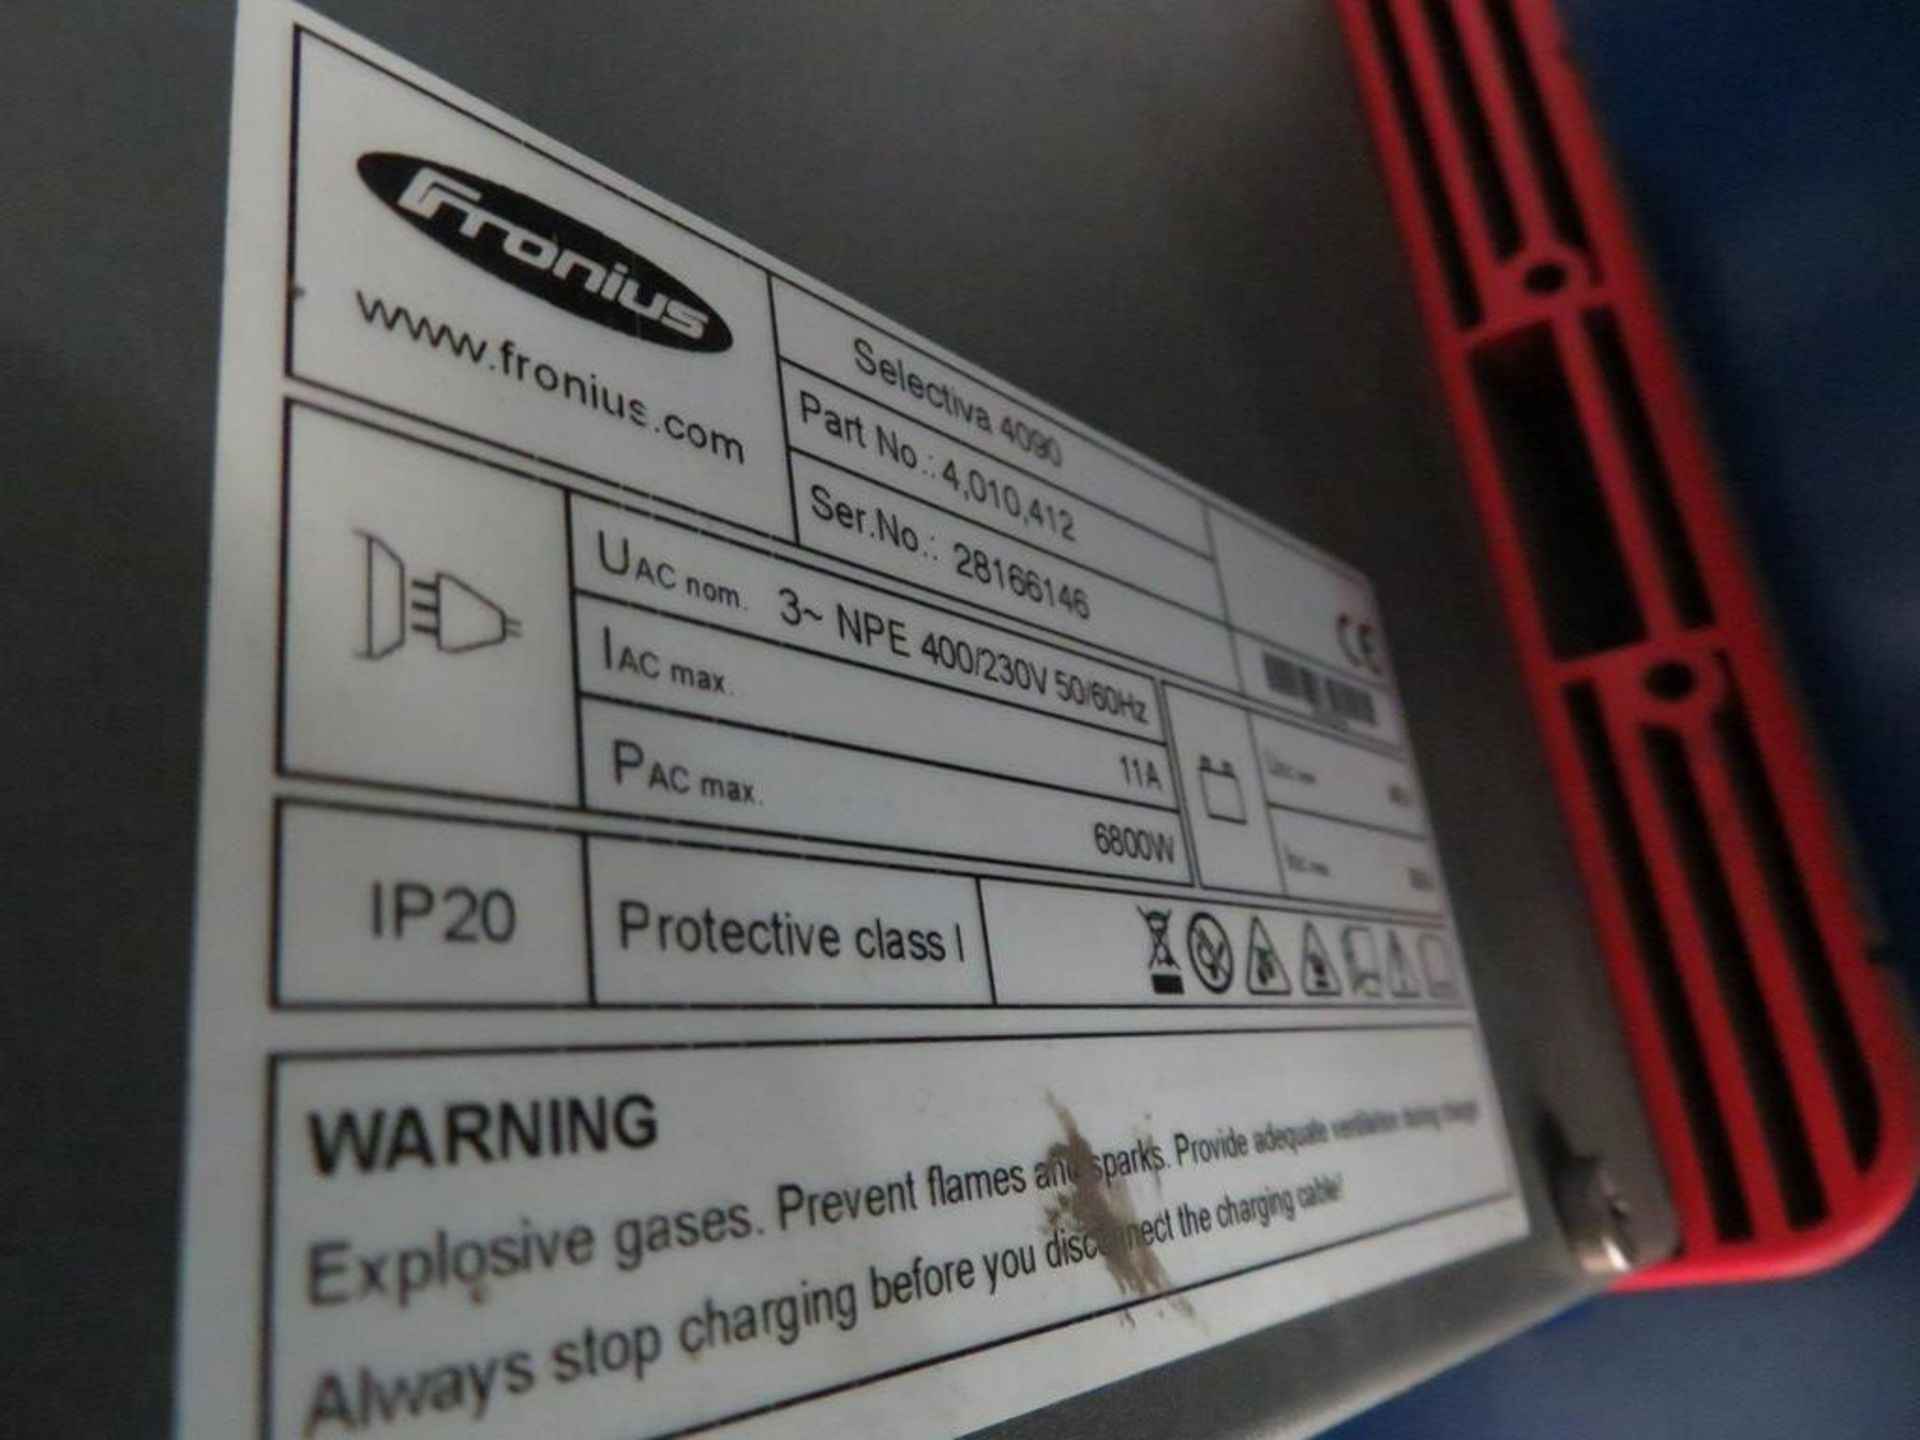 FRONIUS SELECTIVA 4090 8KW - 48V BATTERY CHARGER; SERIAL NO 28166146 - Image 2 of 2